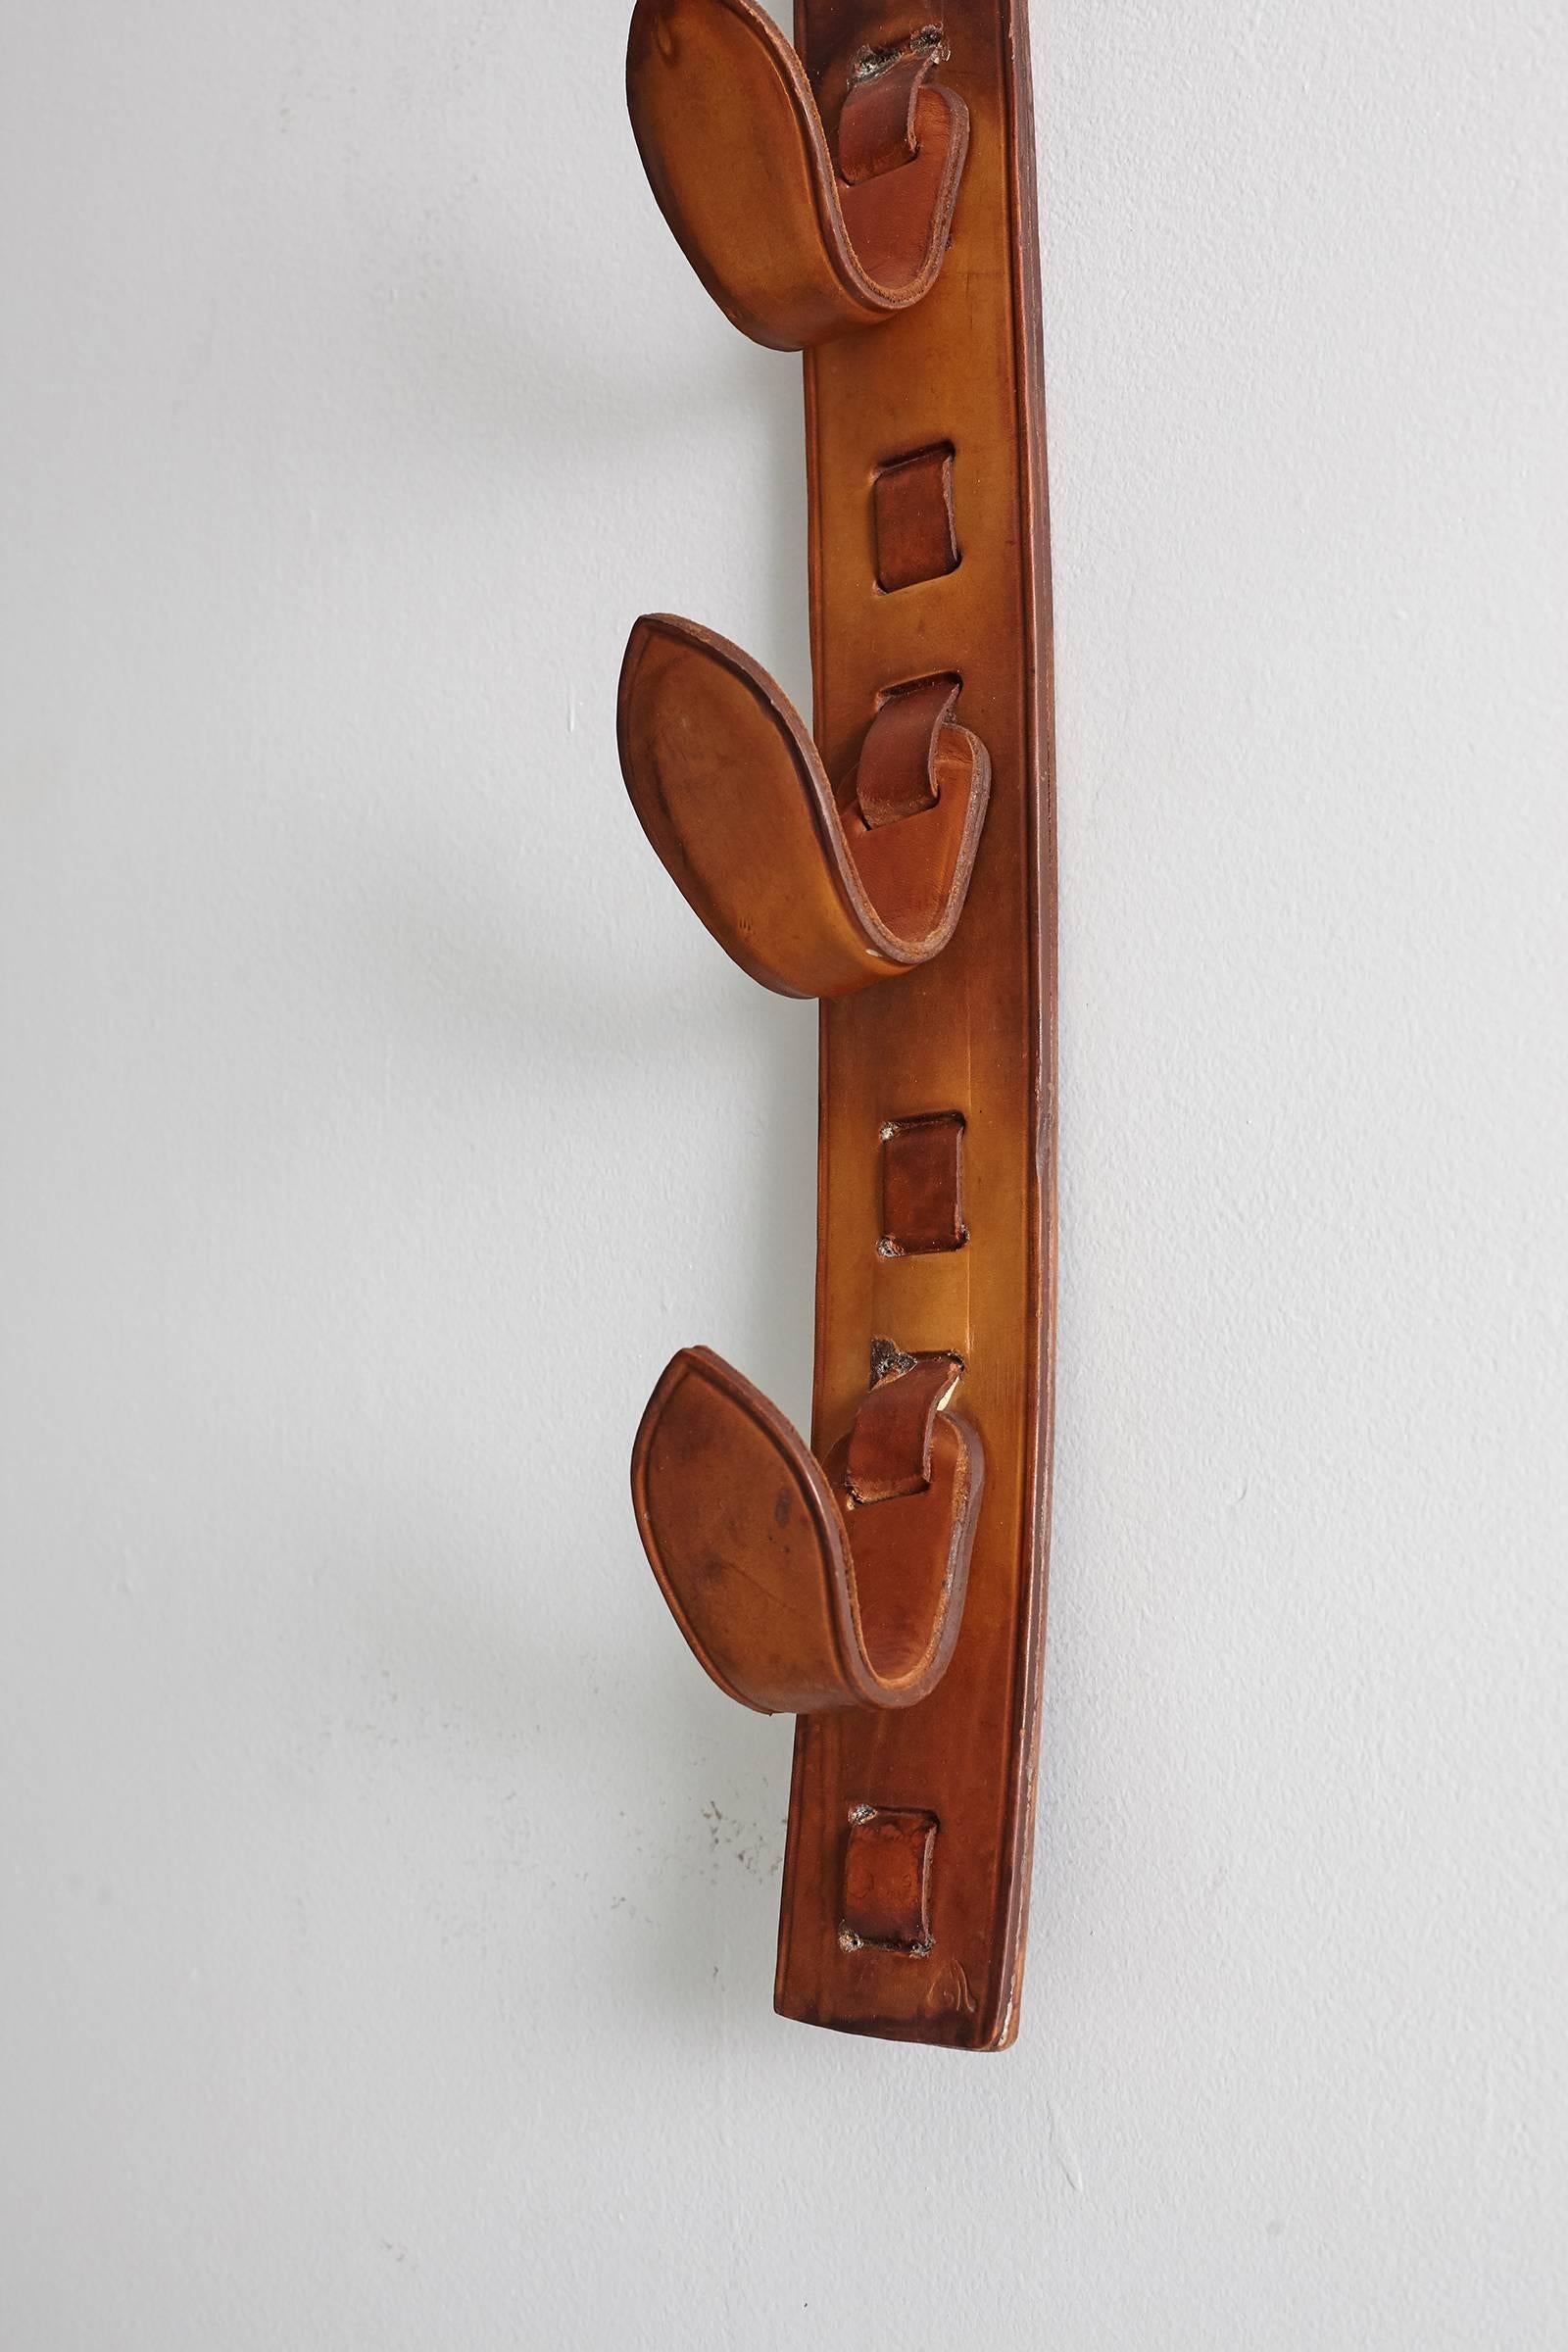 French Jacques Adnet Leather Set of Three Wall Hooks